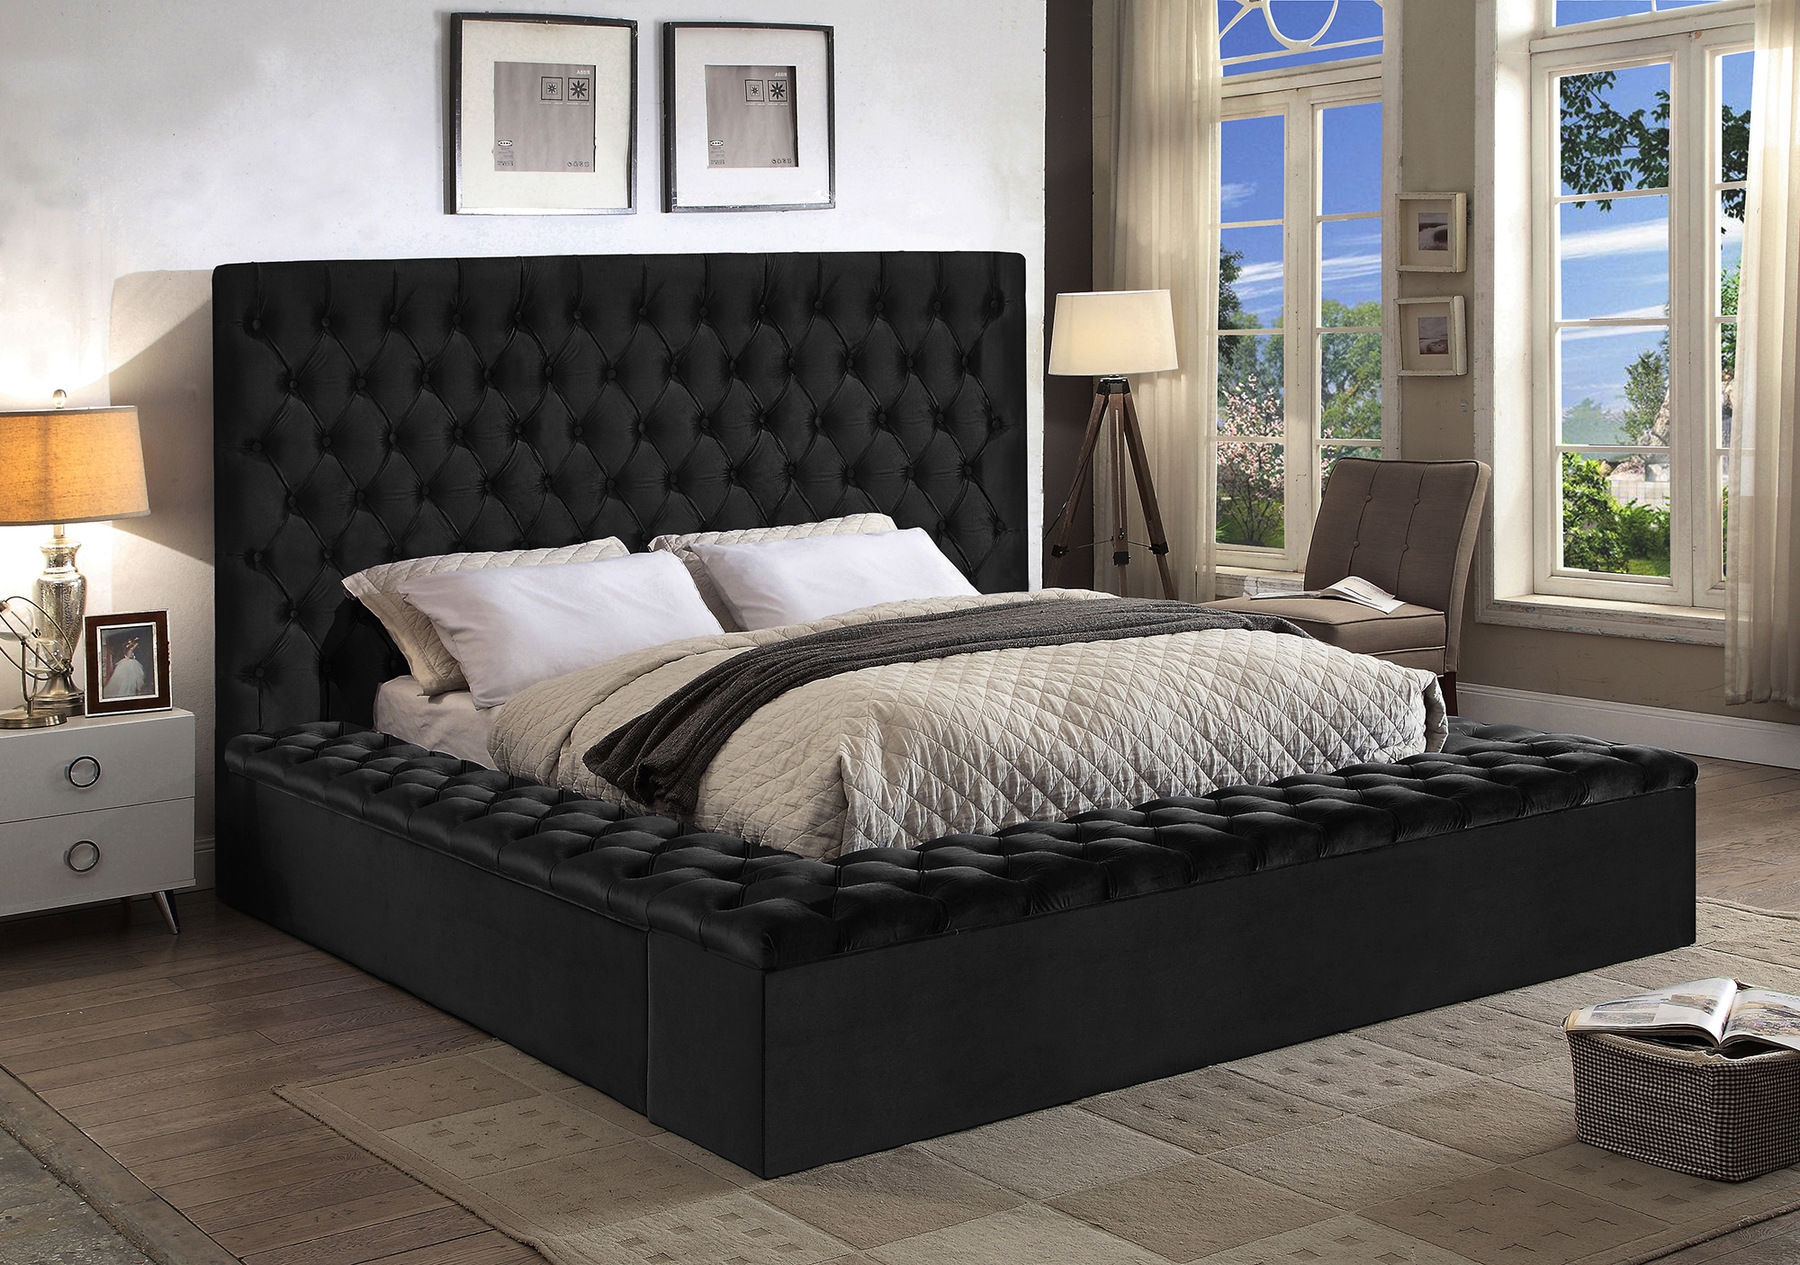 King Size Beds Comfyco Furniture, A King Size Bed